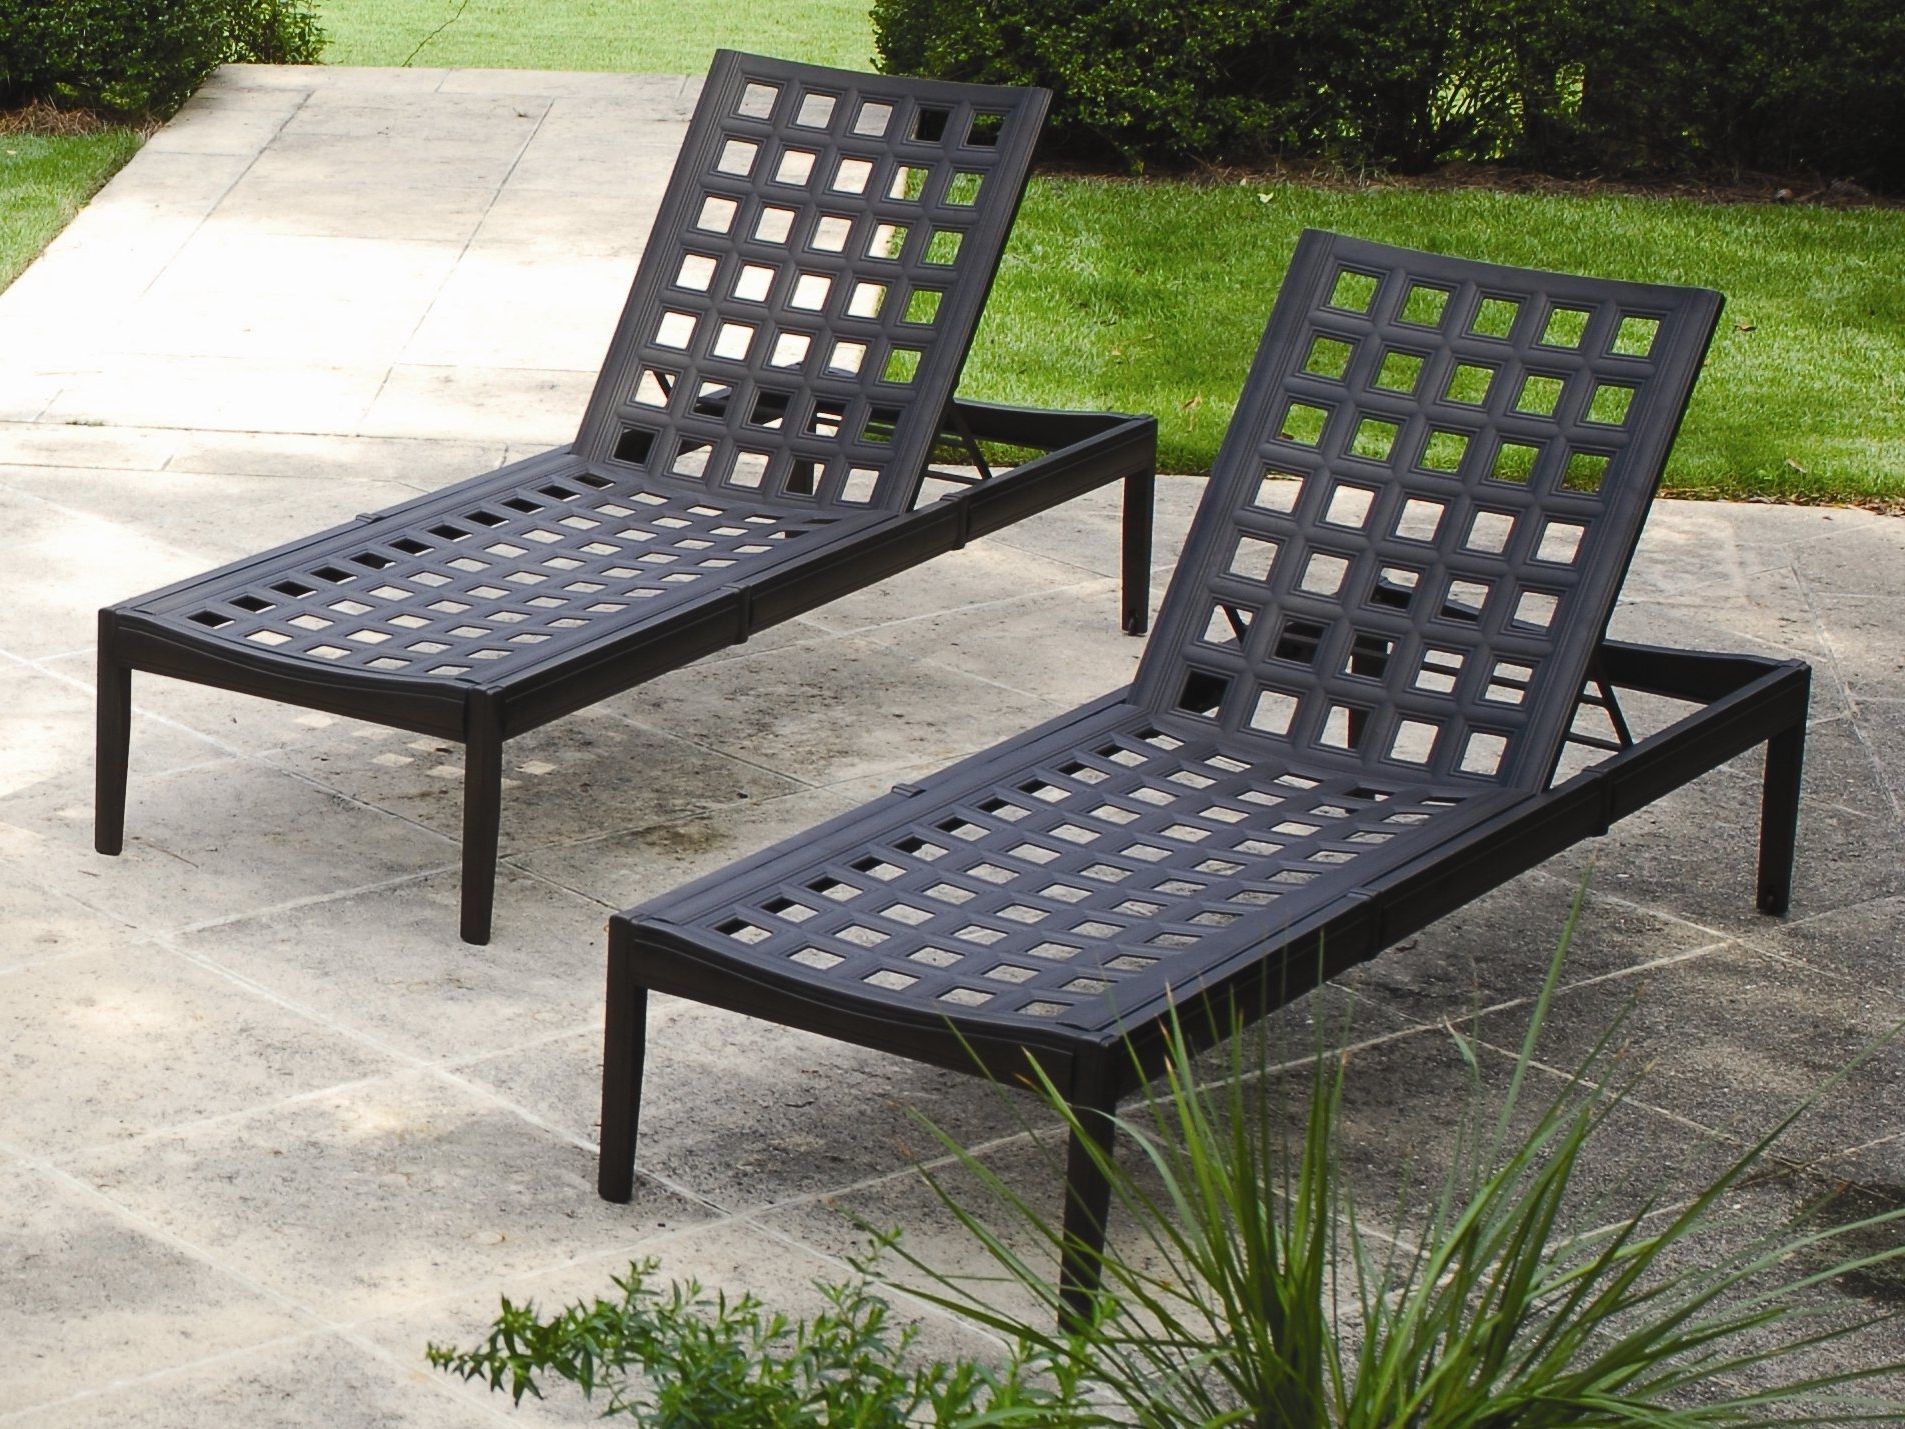 Heavy Duty Outdoor Chaise Lounge Chairs With Widely Used Lounge Chair : Best Garden Furniture Plastic Patio Chairs Resin (View 1 of 15)